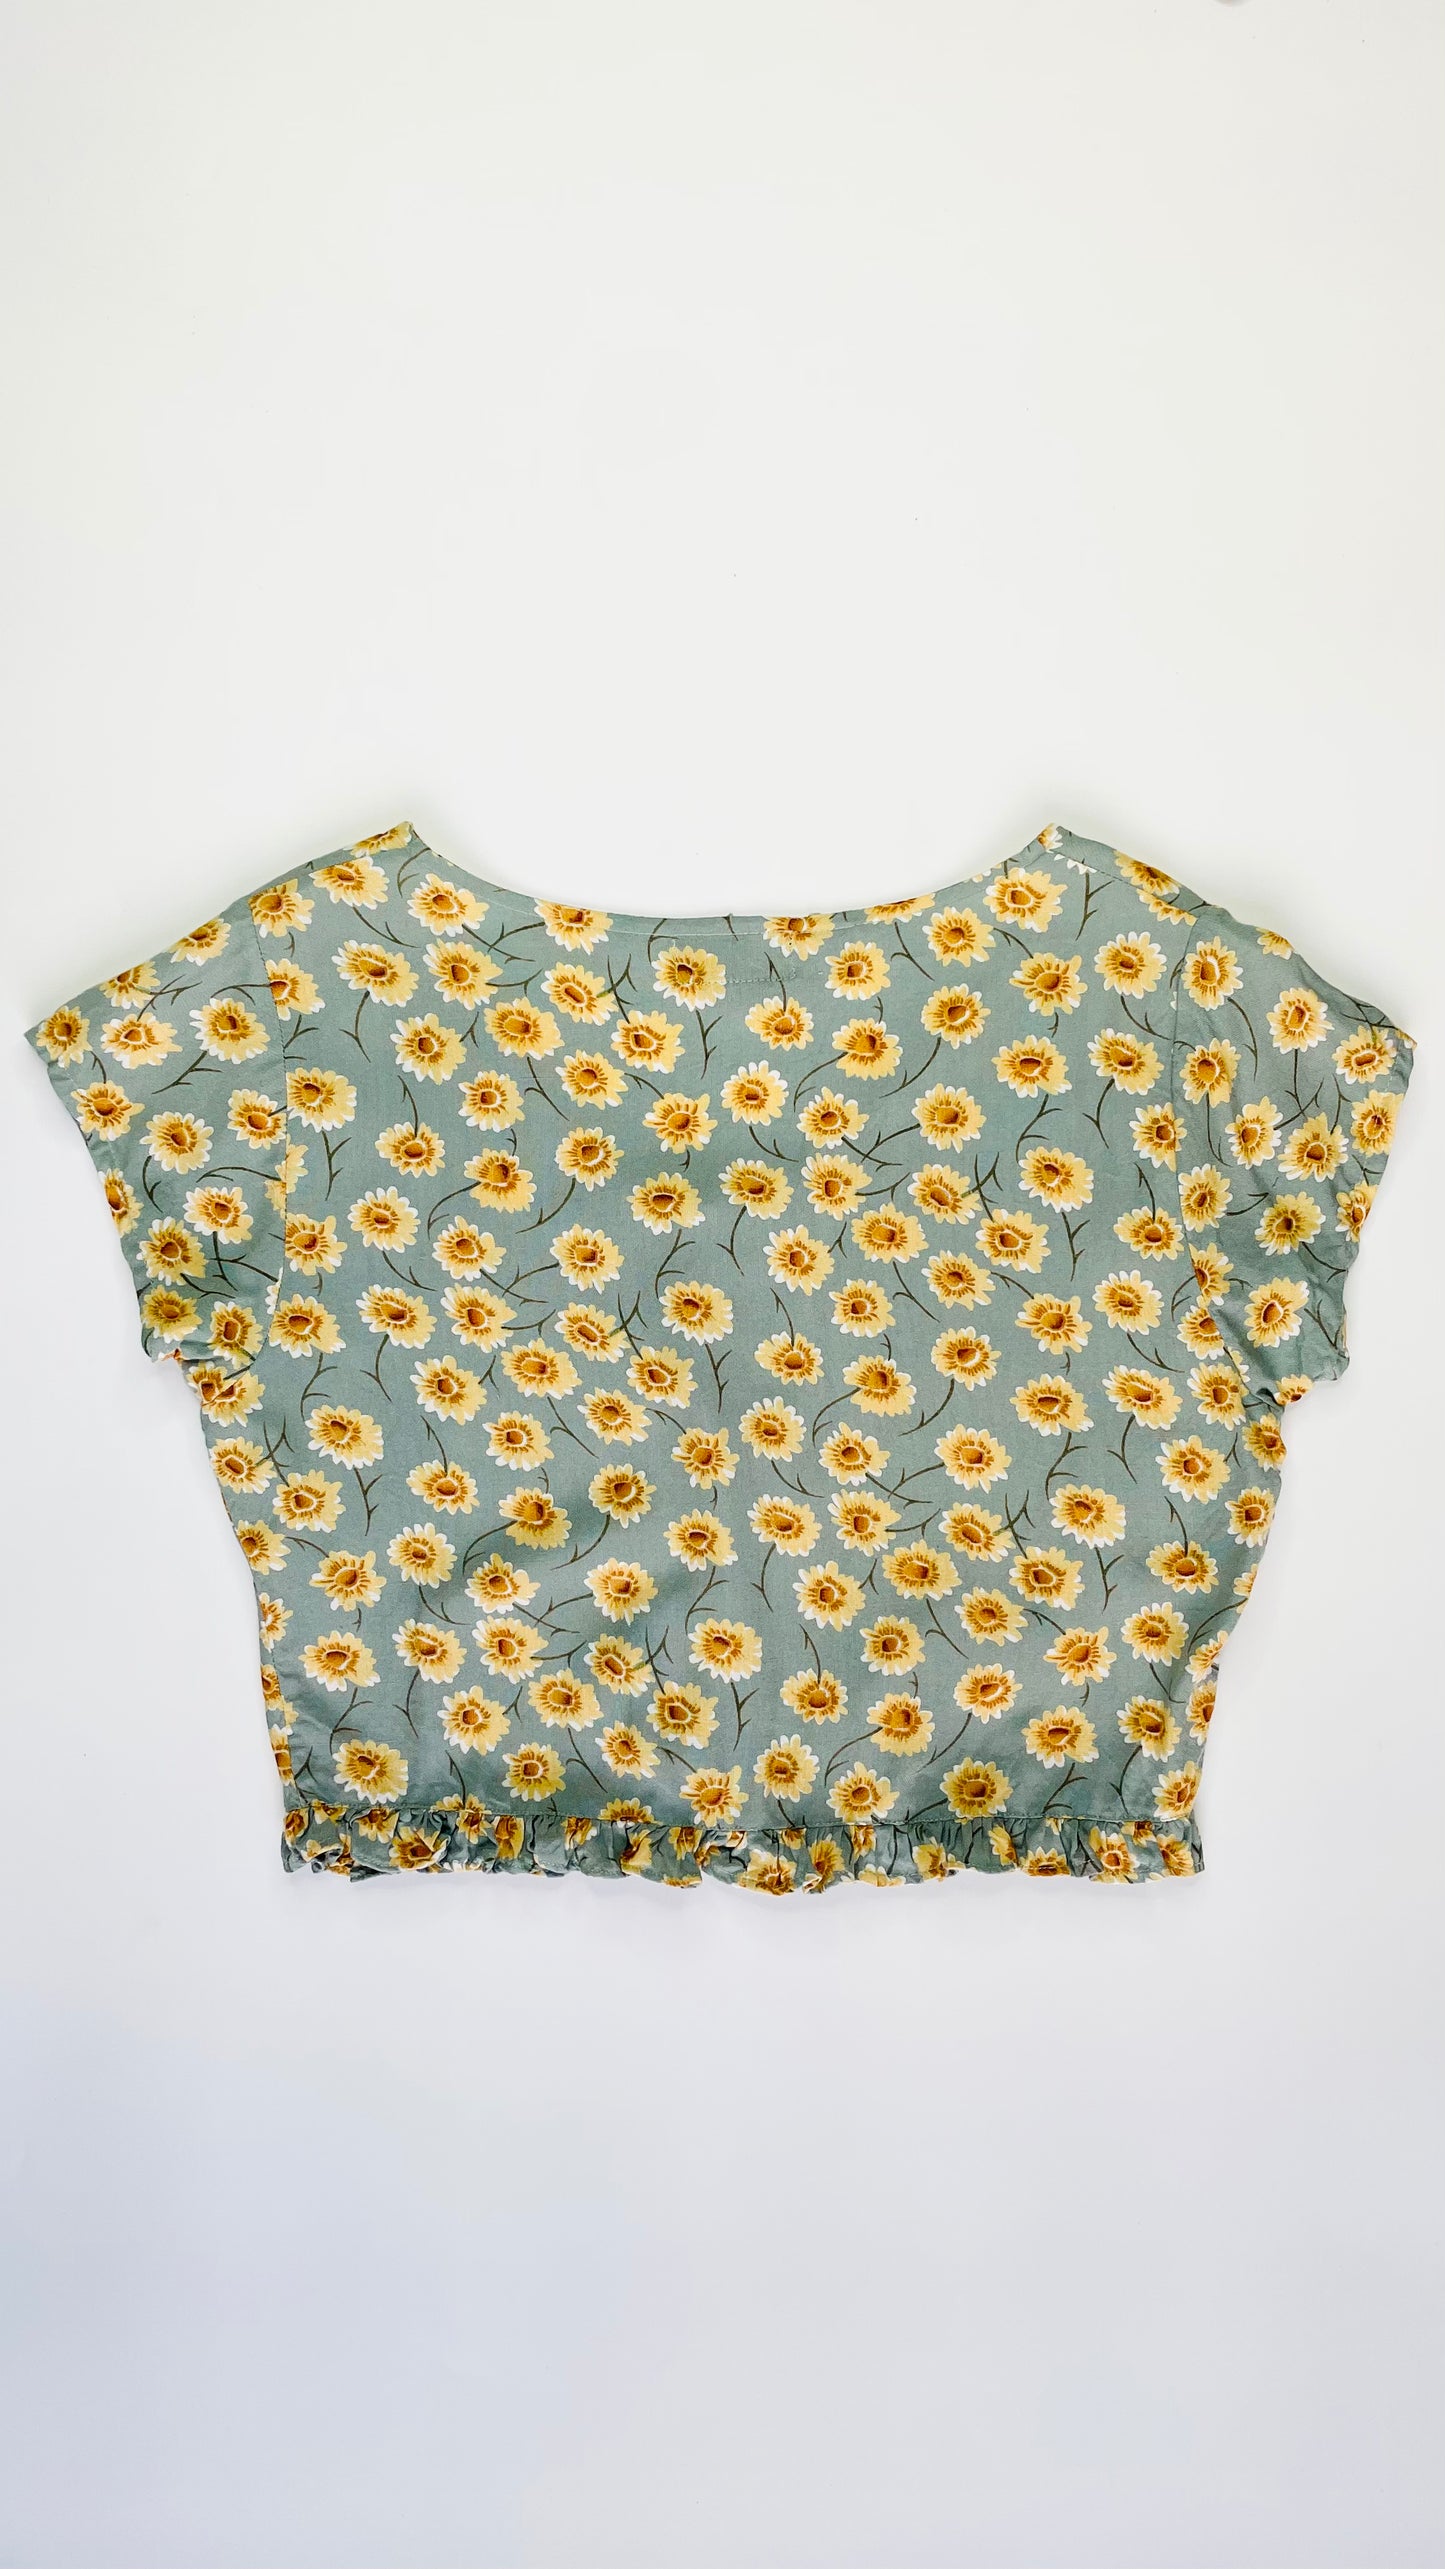 Vintage 90s blue and yellow floral print short sleeve top - Size M